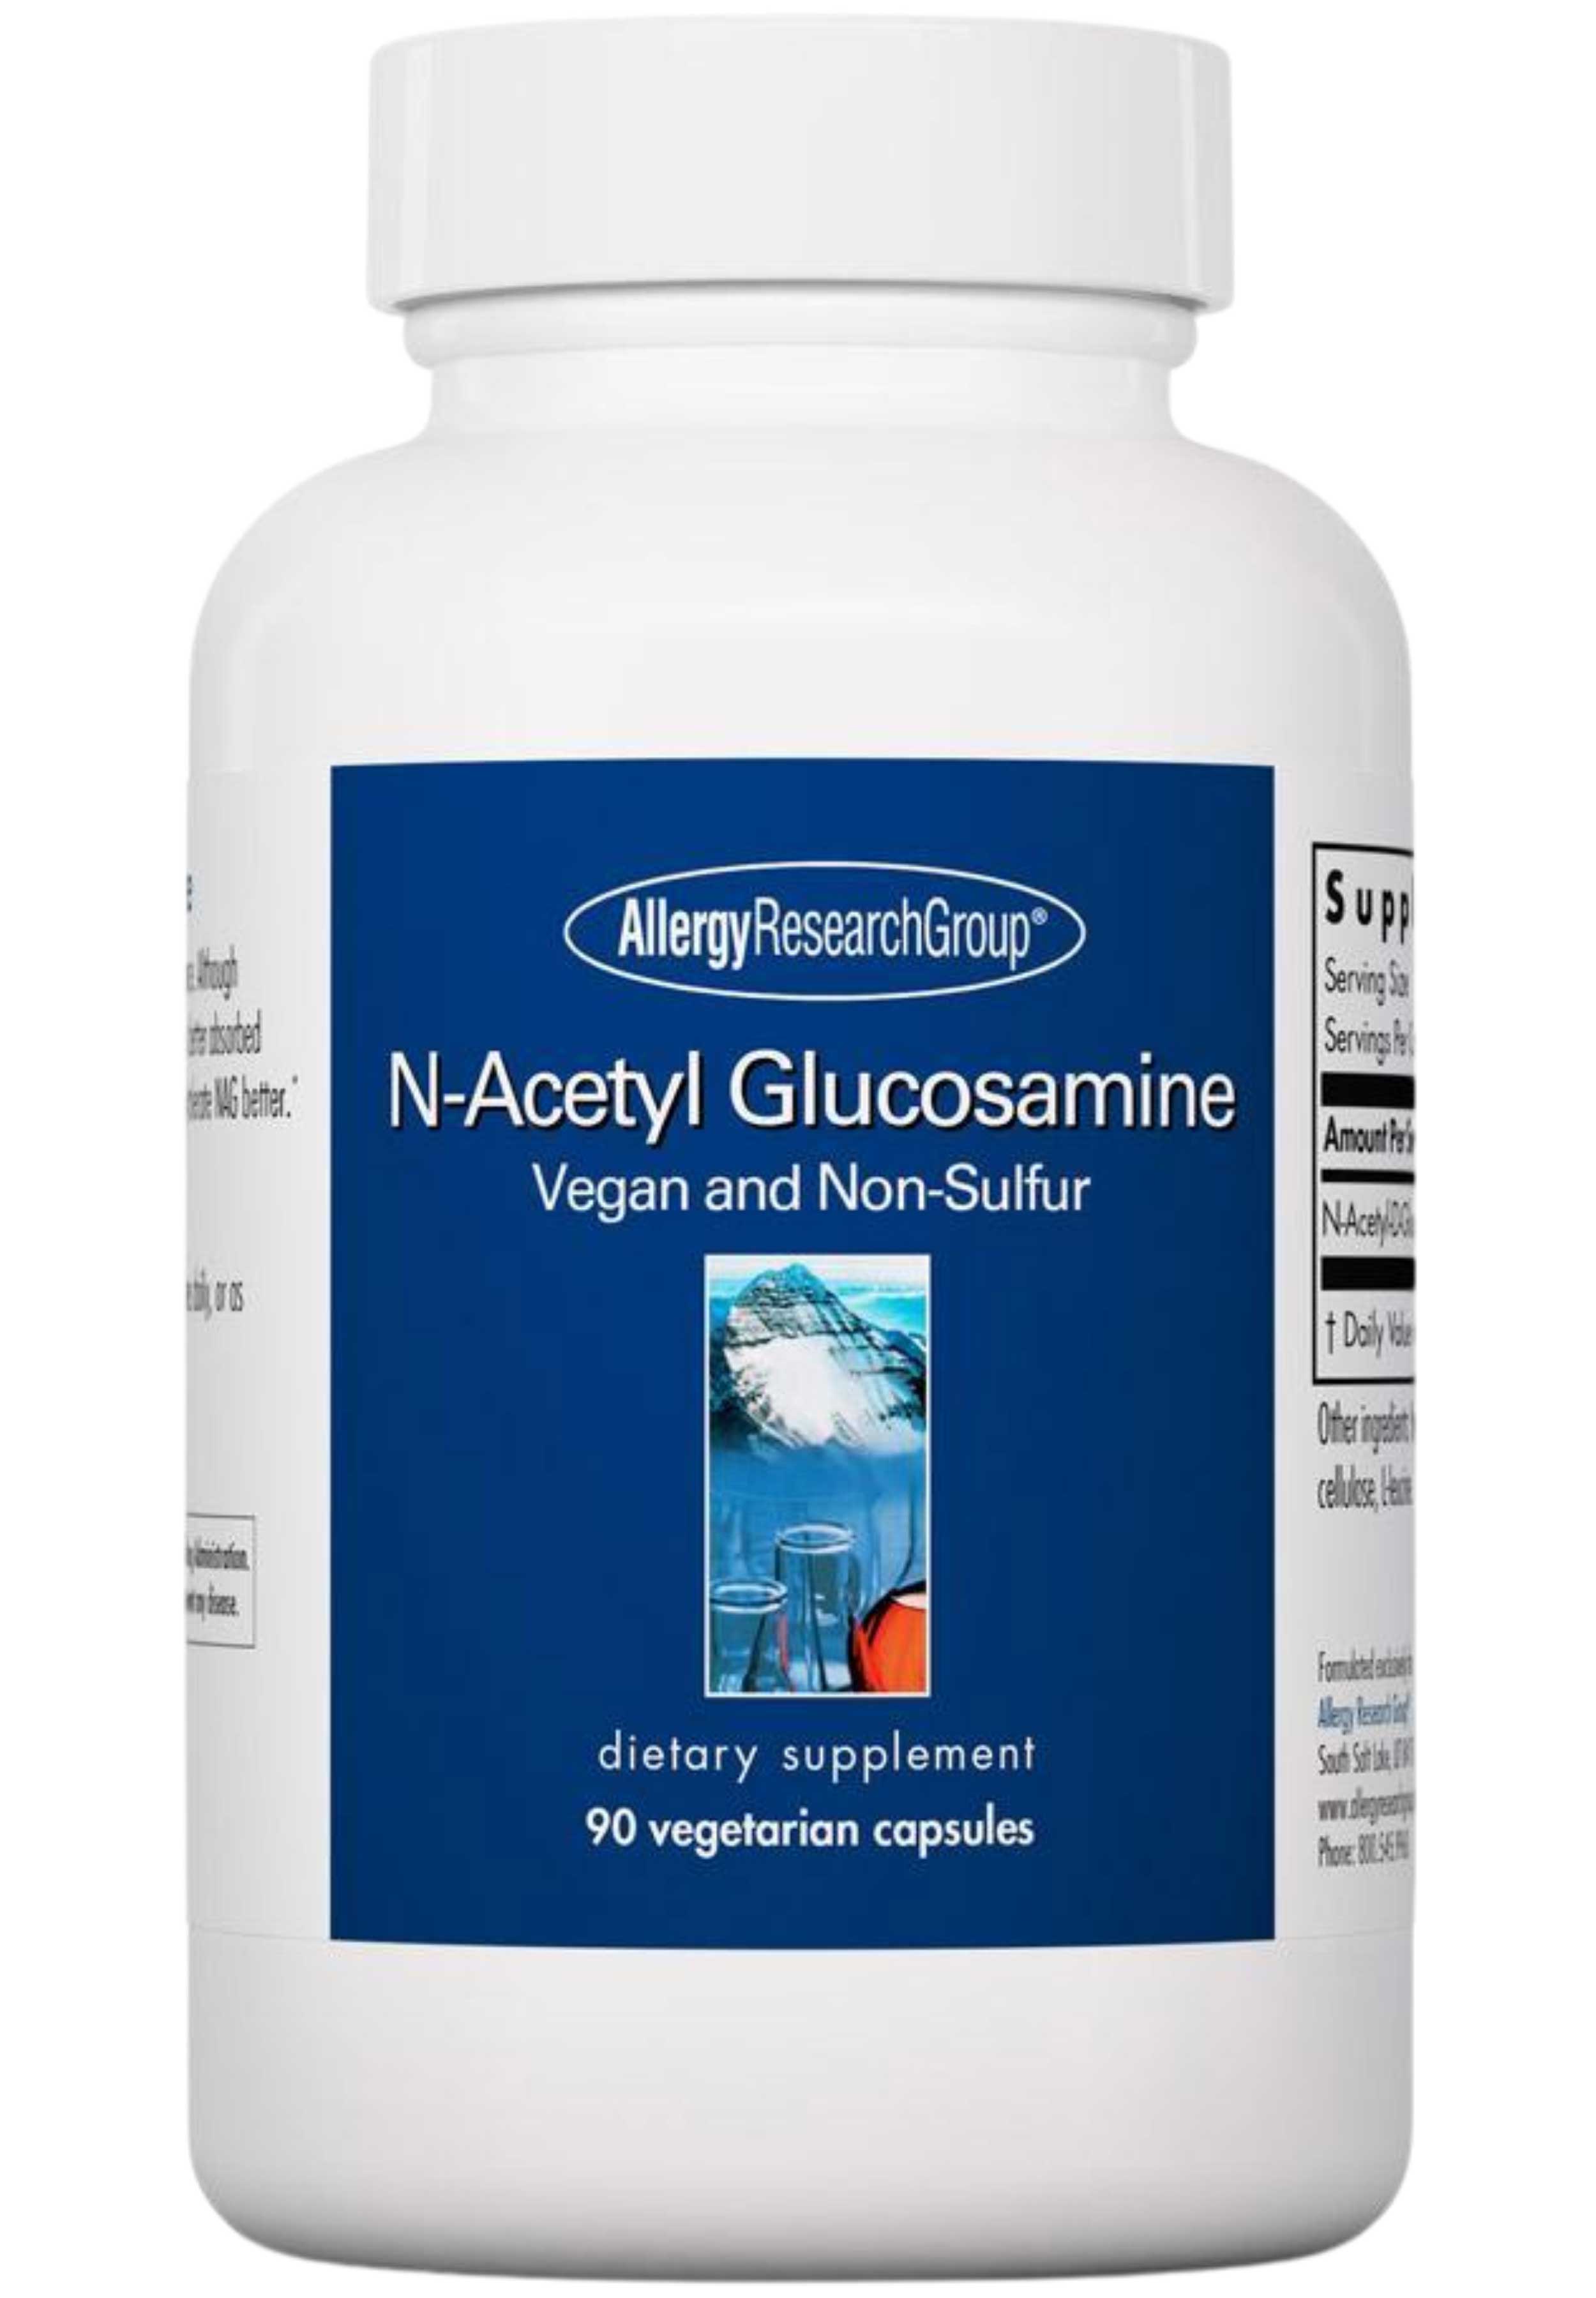 Allergy Research Group N-Acetyl Glucosamine